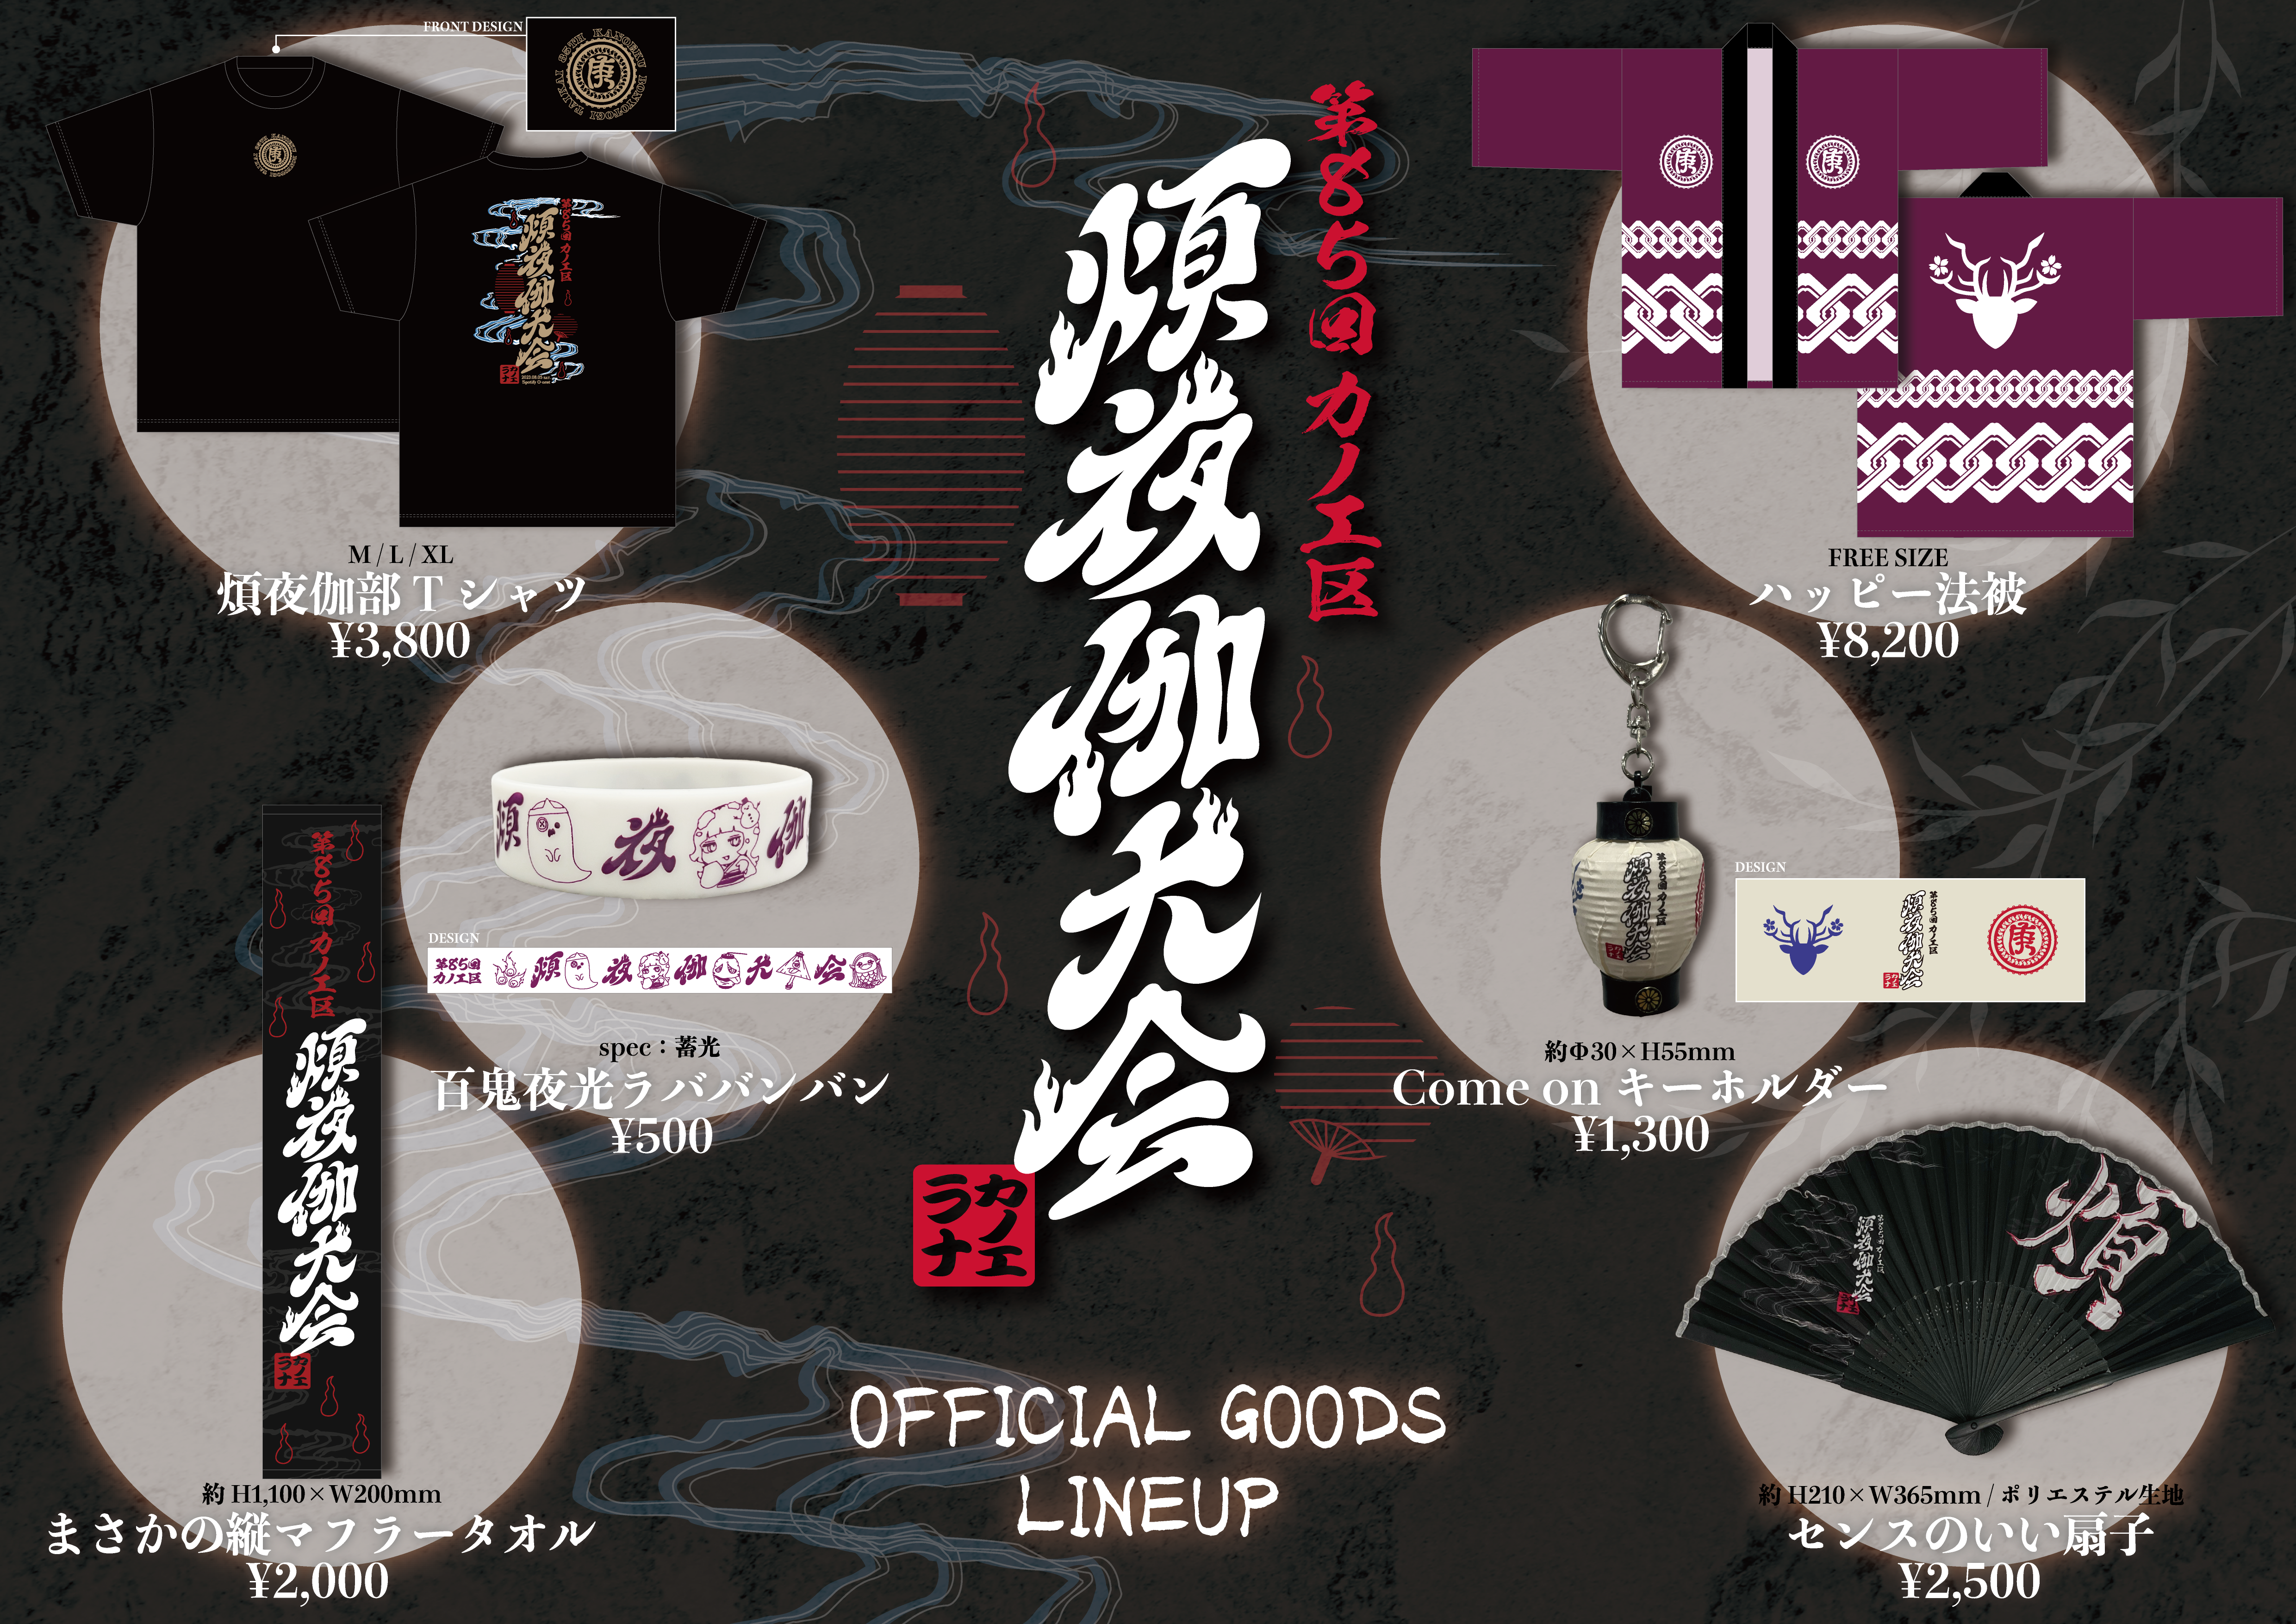 RKBY_goods lineup.png